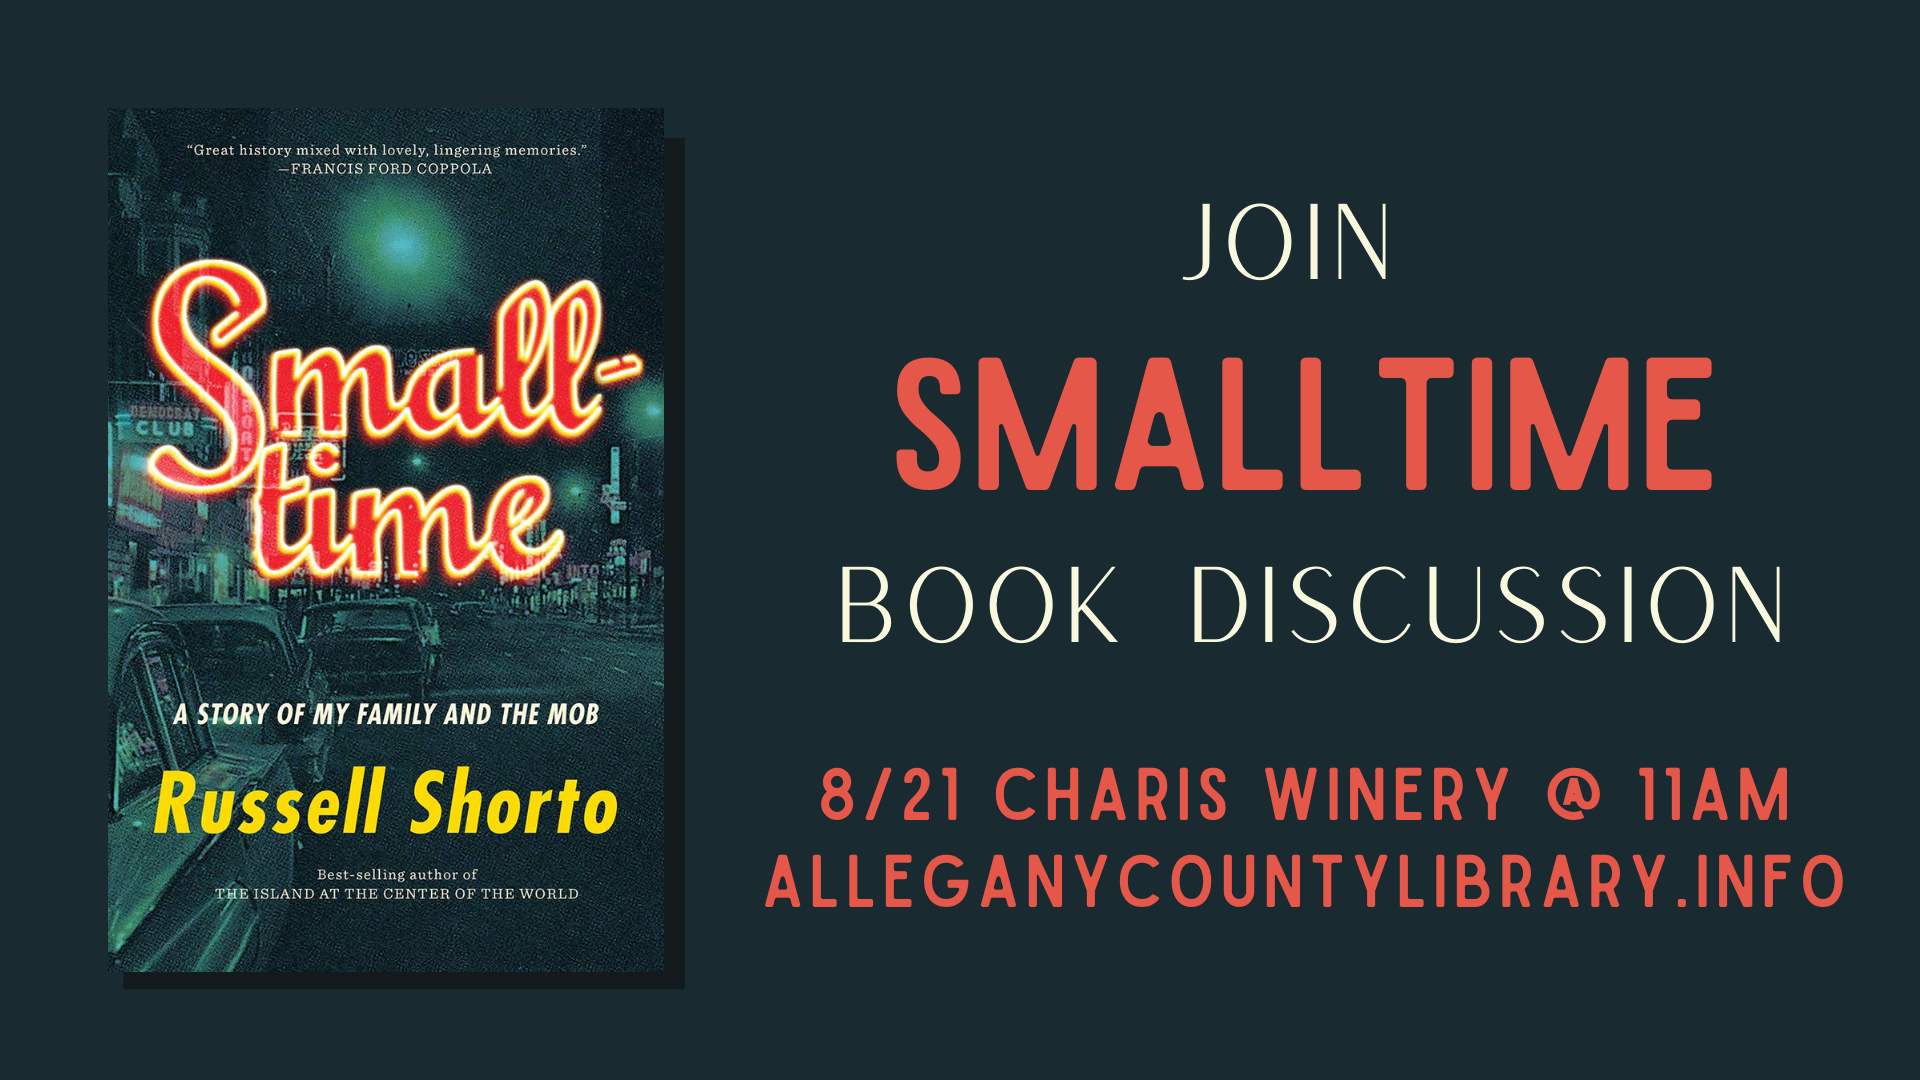 Cover for Smalltime by Russell Shorto. Blue city in background with red font for title.